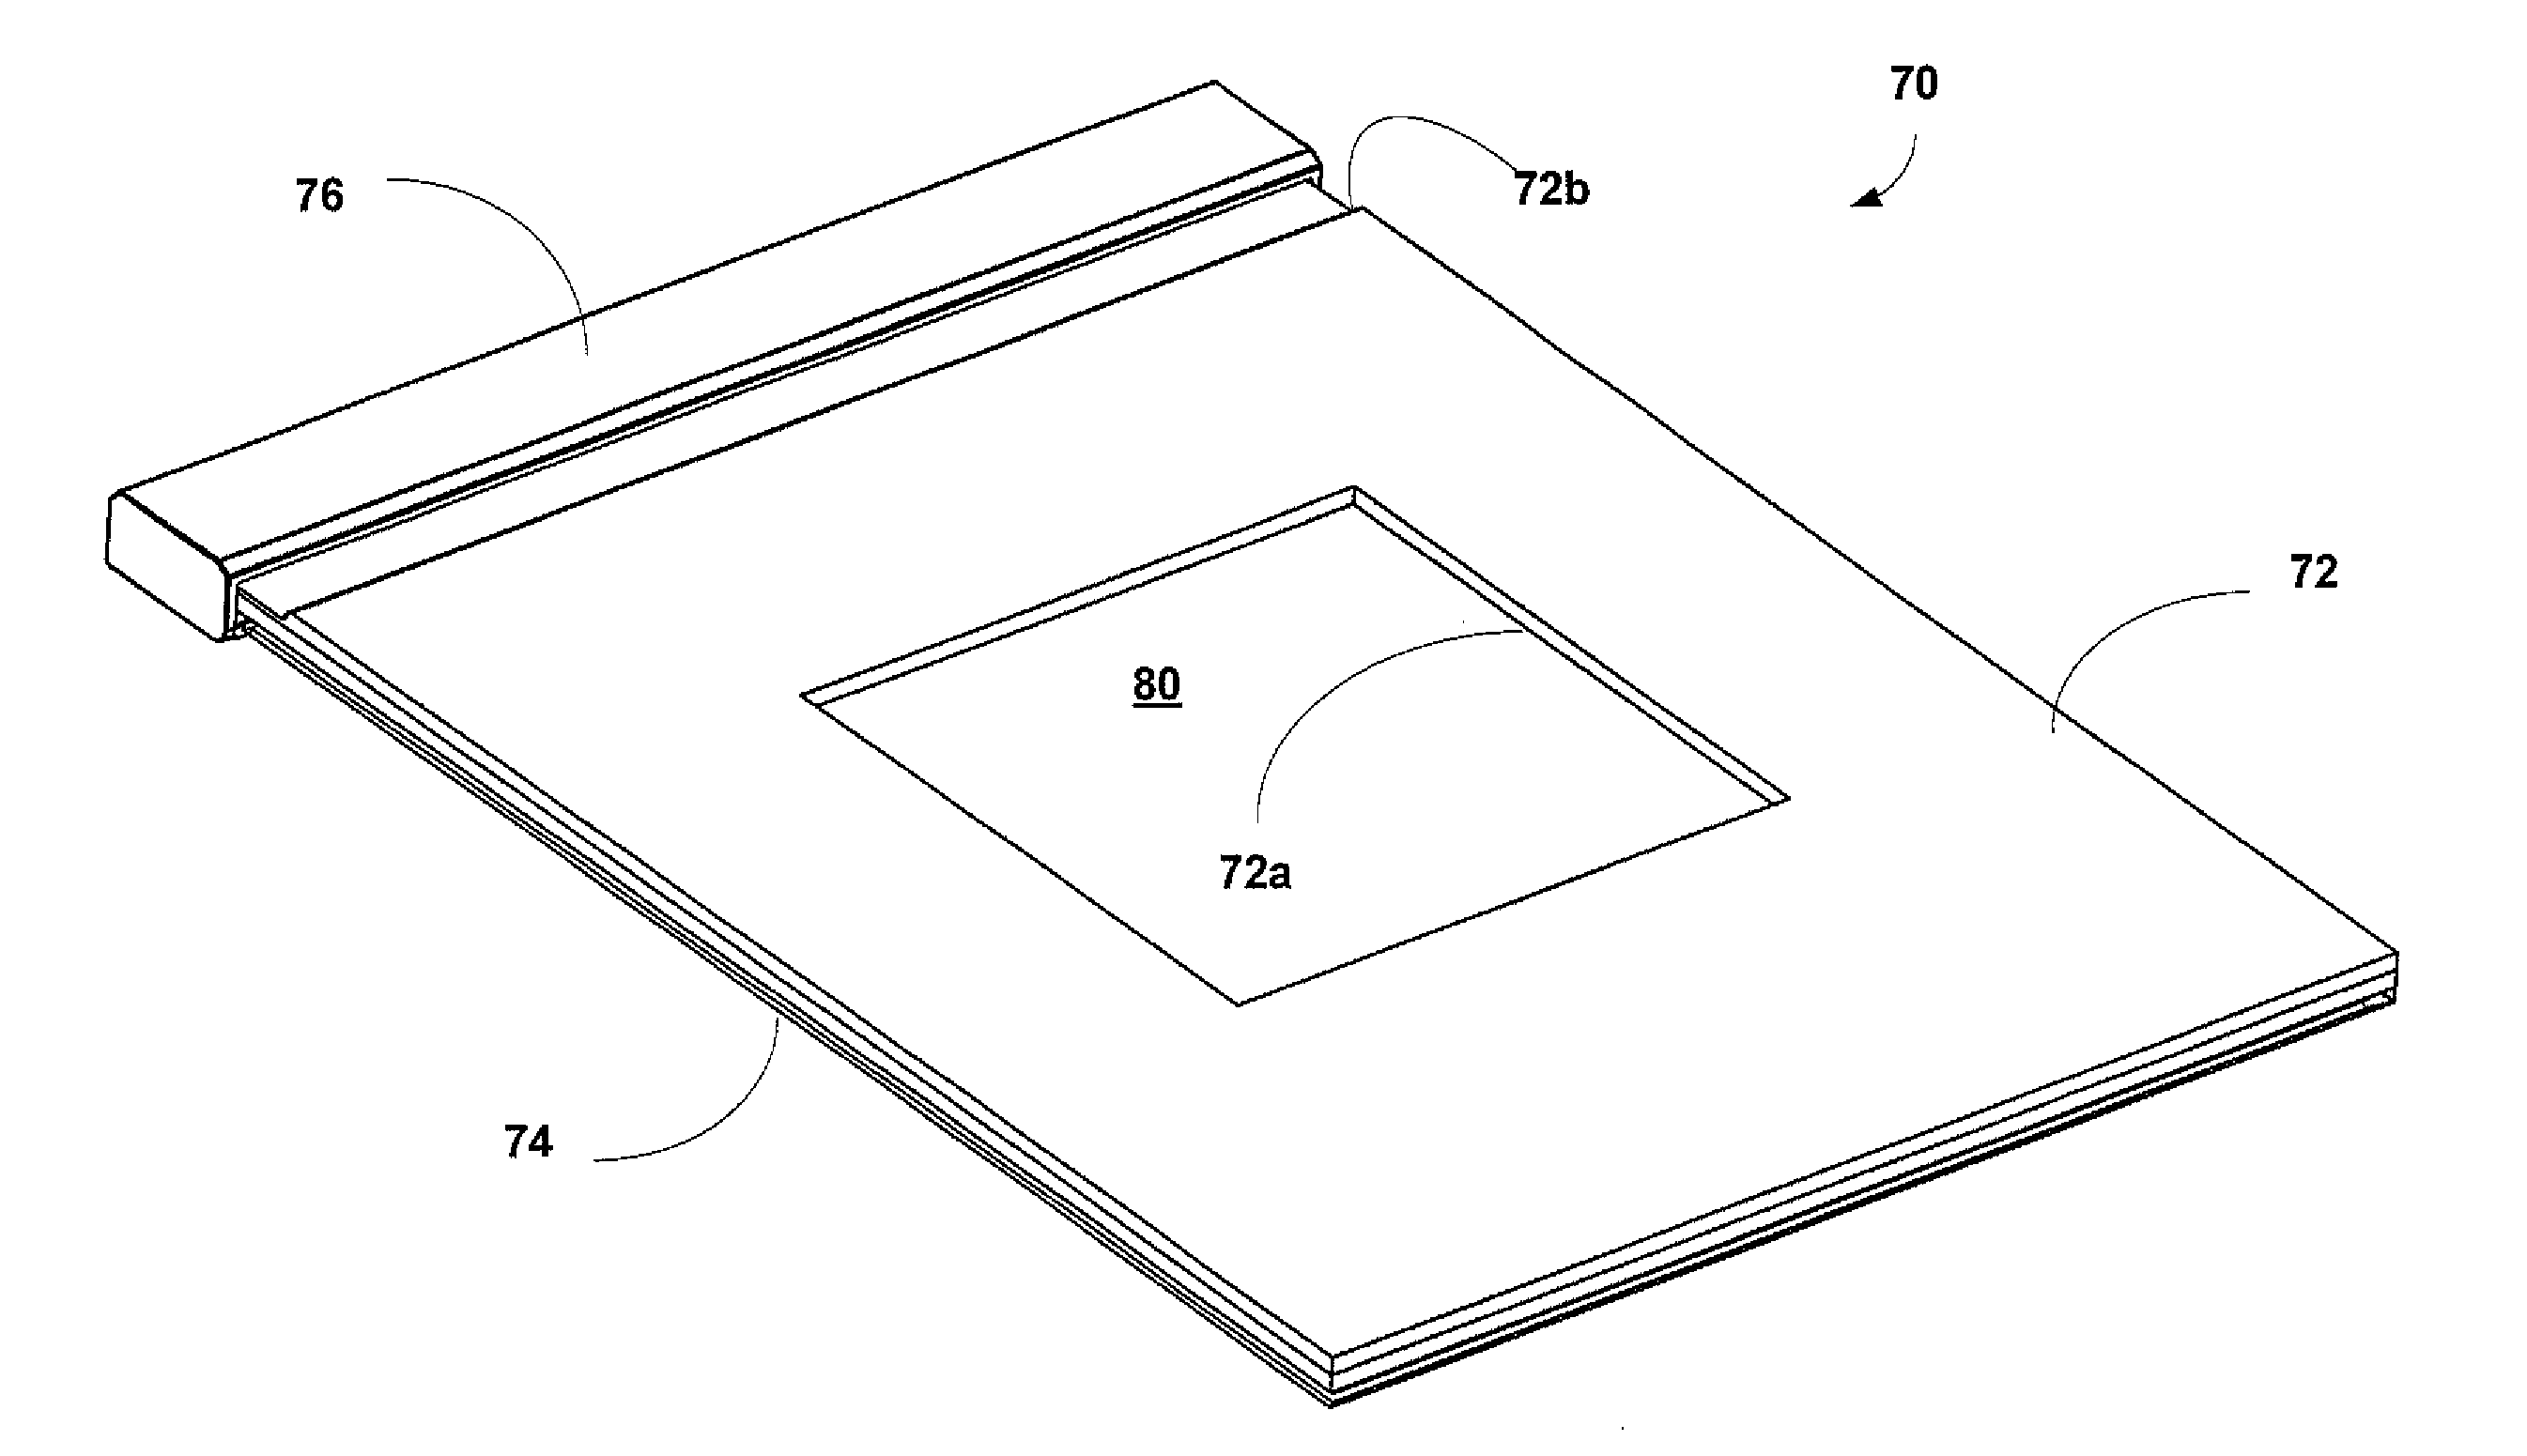 Multimedia Keepsakes and Method and System for Their Manufacture